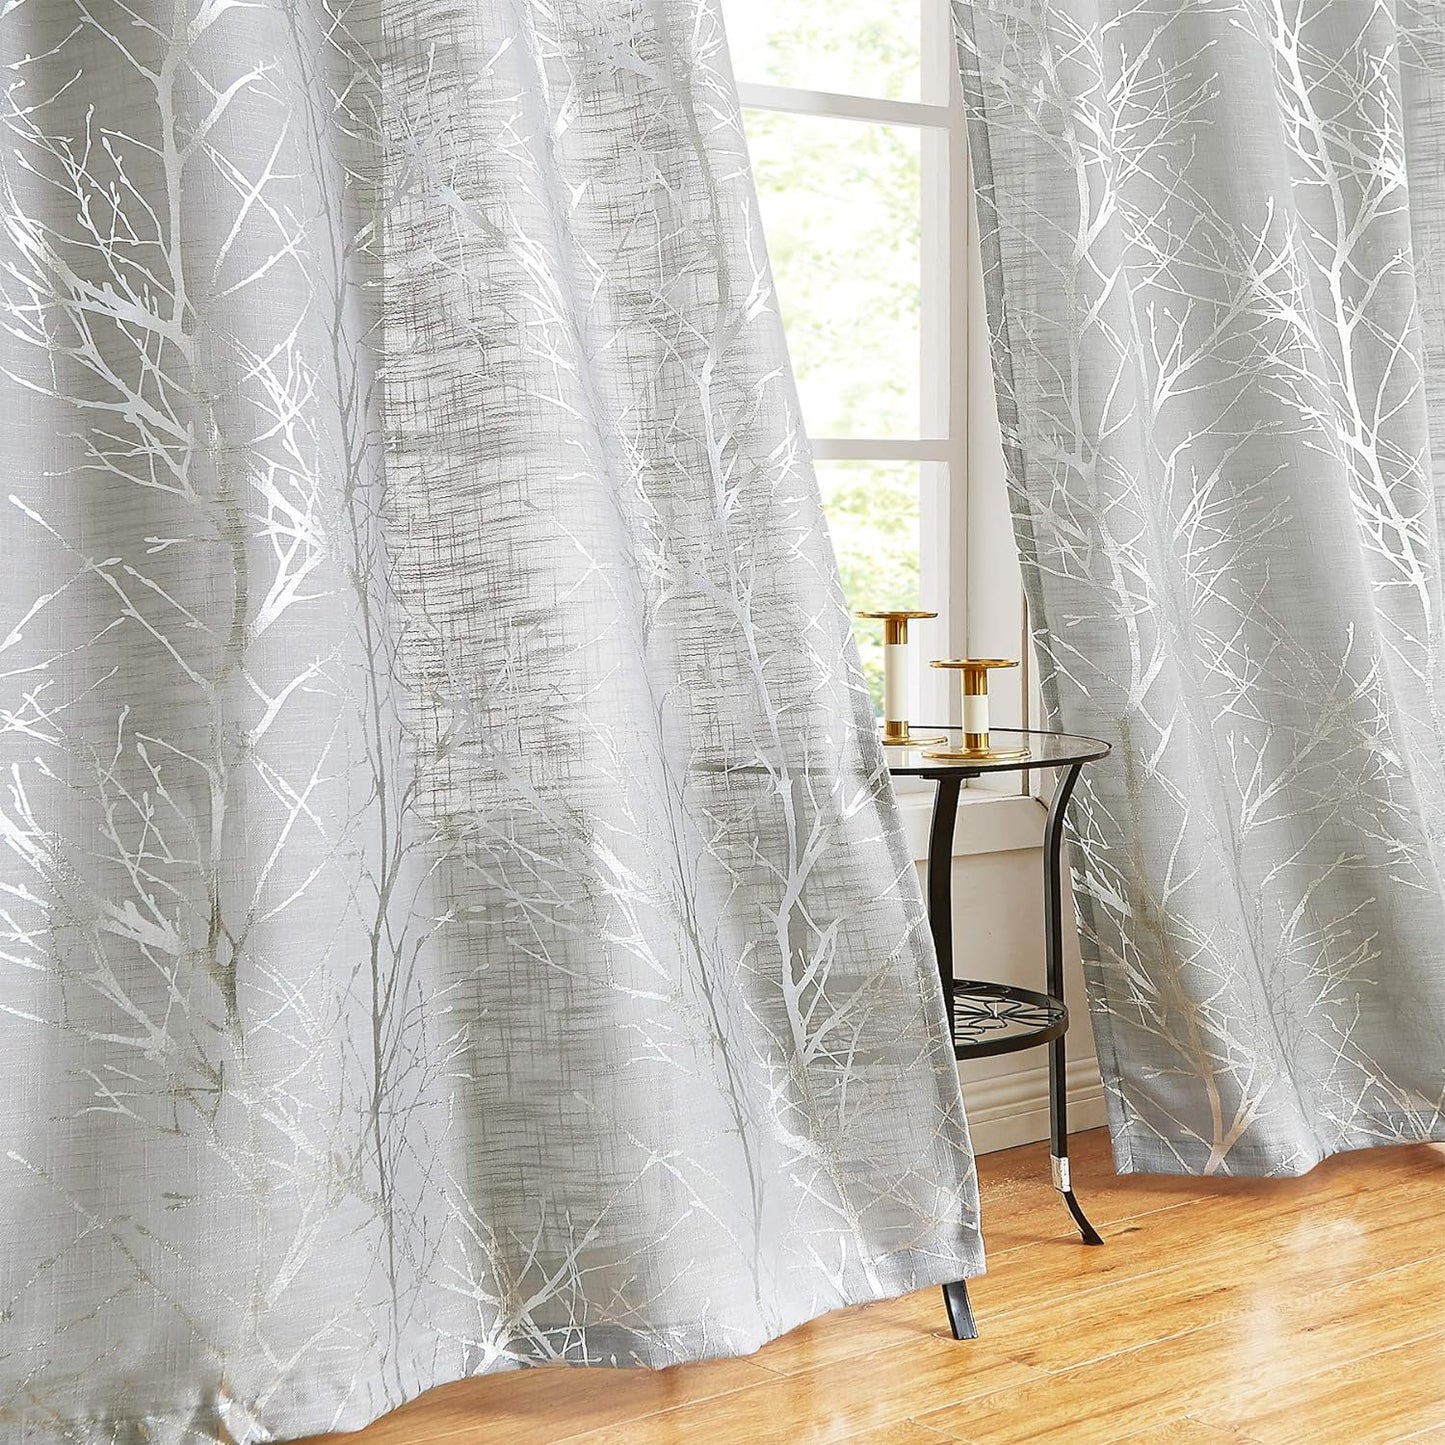 FMFUNCTEX Blue White Curtains for Kitchen Living Room 72“ Grey Tree Branches Print Curtain Set for Small Windows Linen Textured Semi-Sheer Drapes for Bedroom Grommet Top, 2 Panels  Fmfunctex Semi-Sheer: Grey + Foil Silver 50" X 54" |2Pcs 